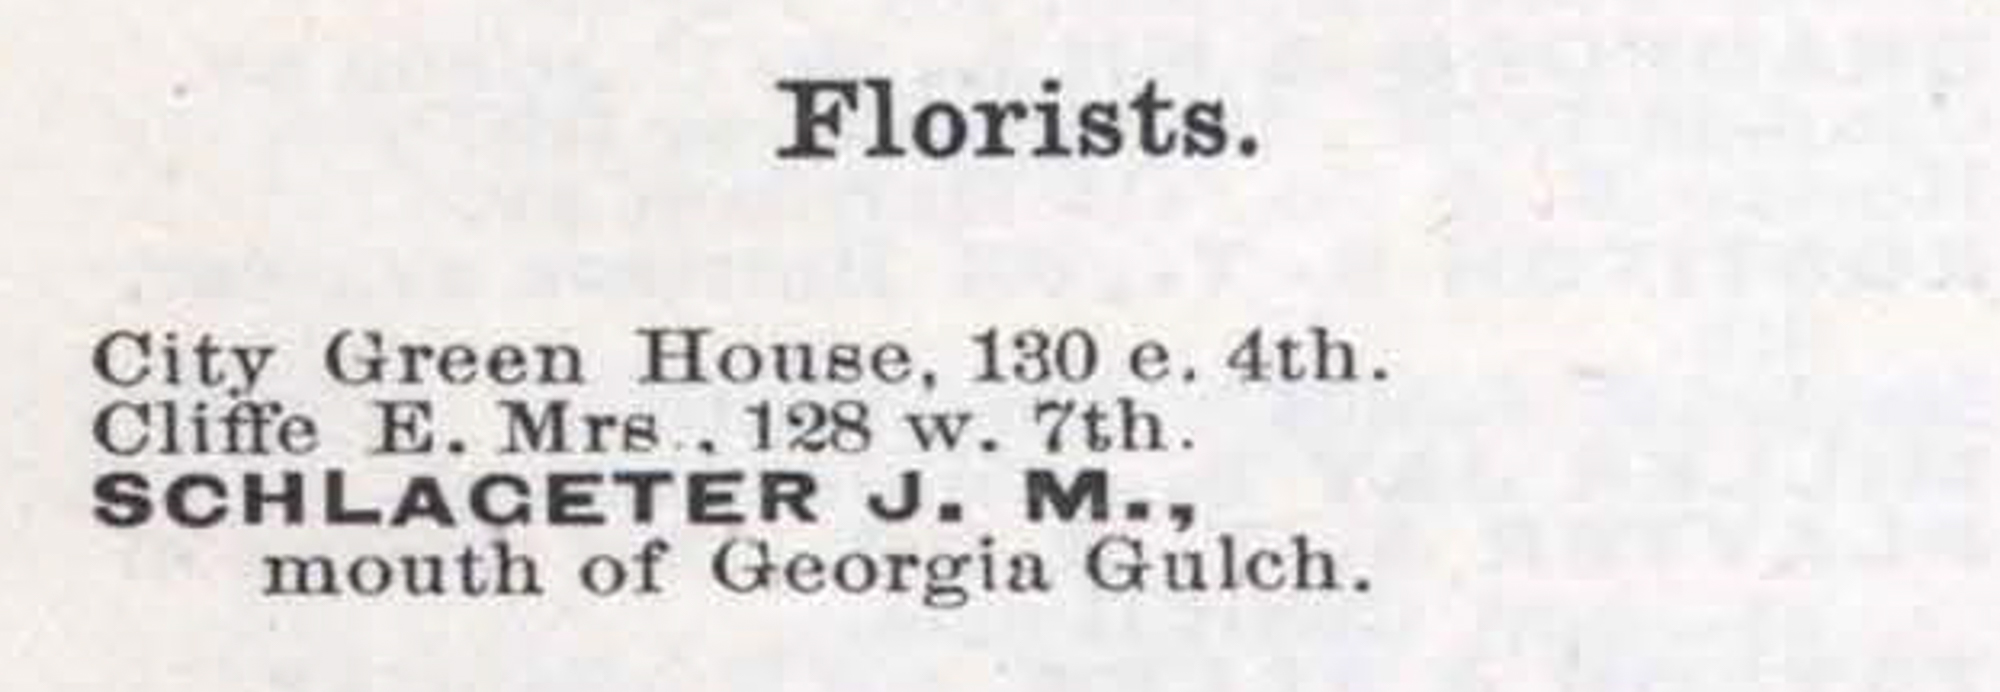 Dauth Family Archive - 1884 - Leadville Directory - Entry for Elisabeth Cliffe